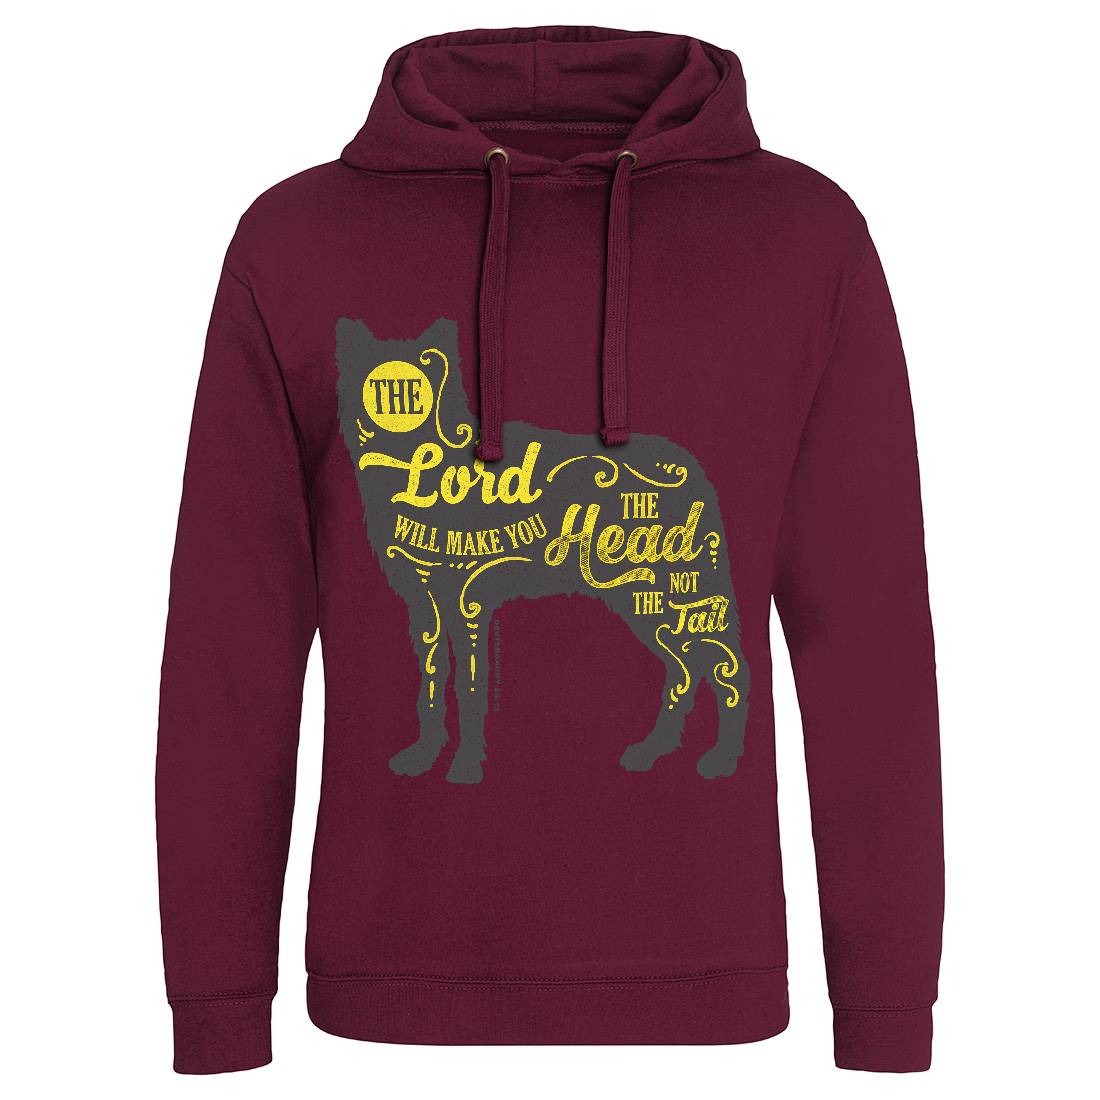 Head Not The Tail Mens Hoodie Without Pocket Religion A326